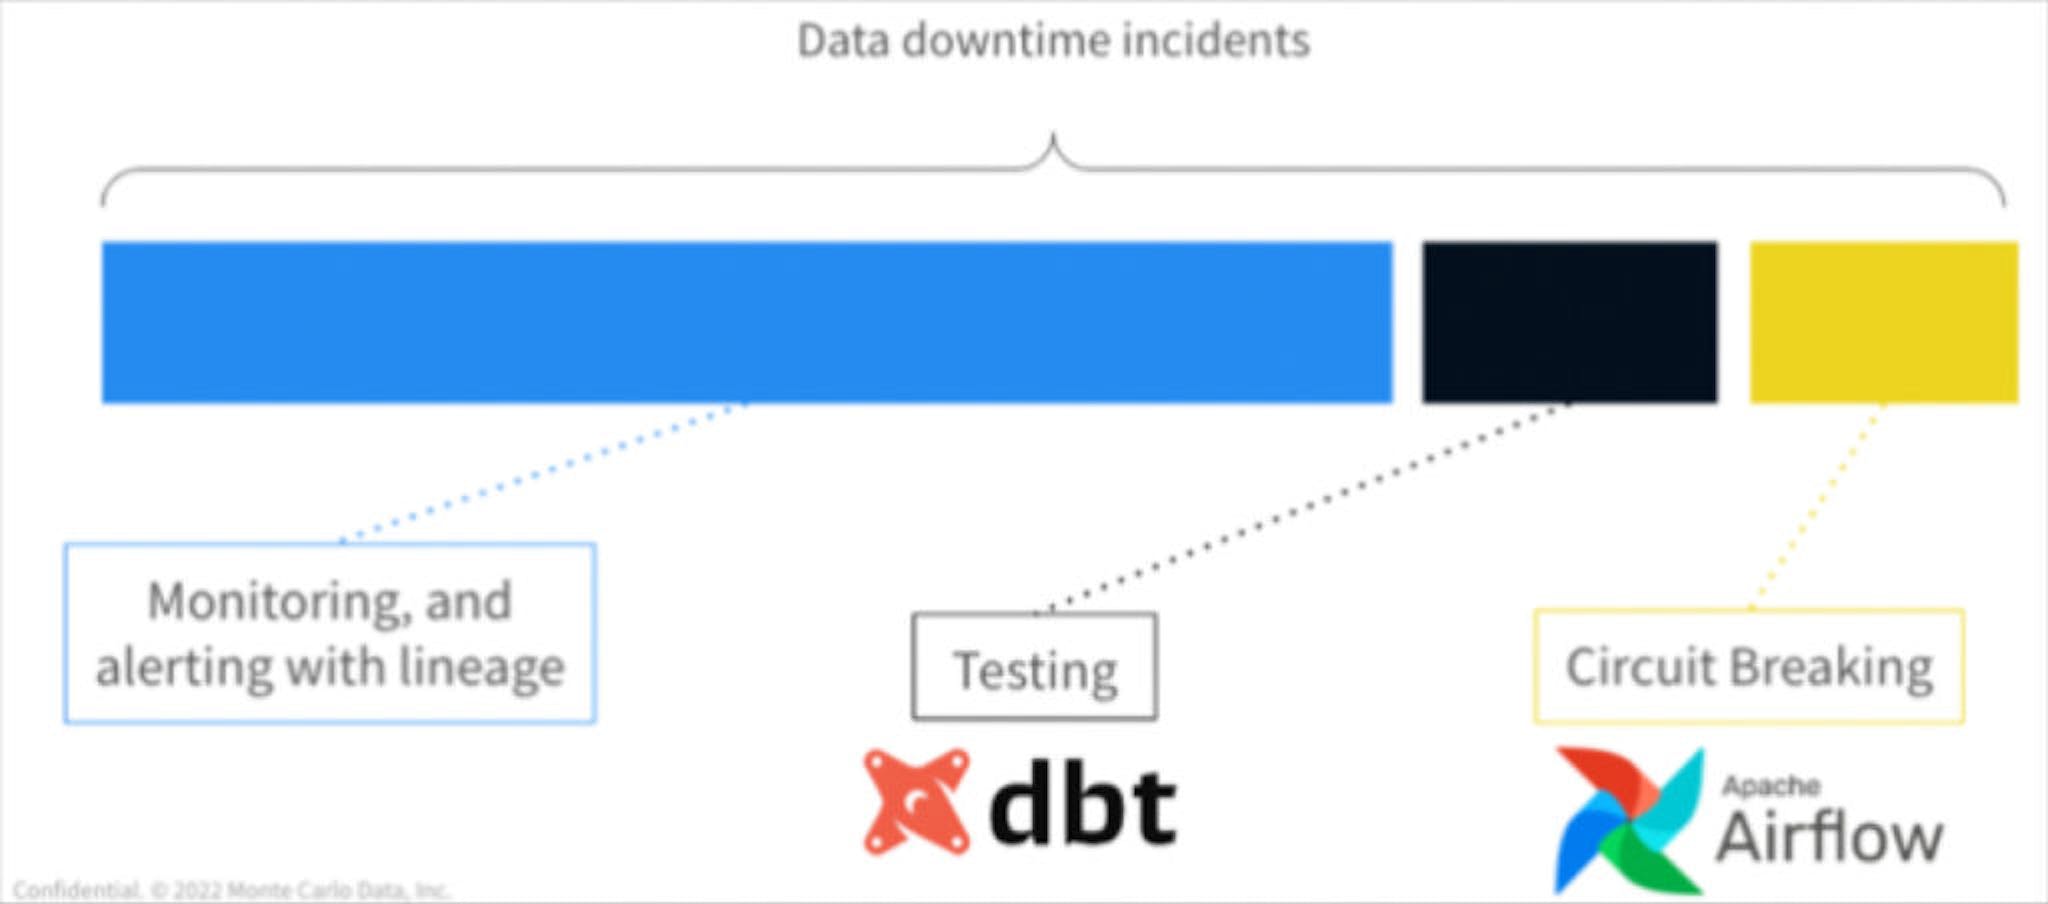 Common use cases and technologies for reducing data downtime. Image courtesy of Monte Carlo.